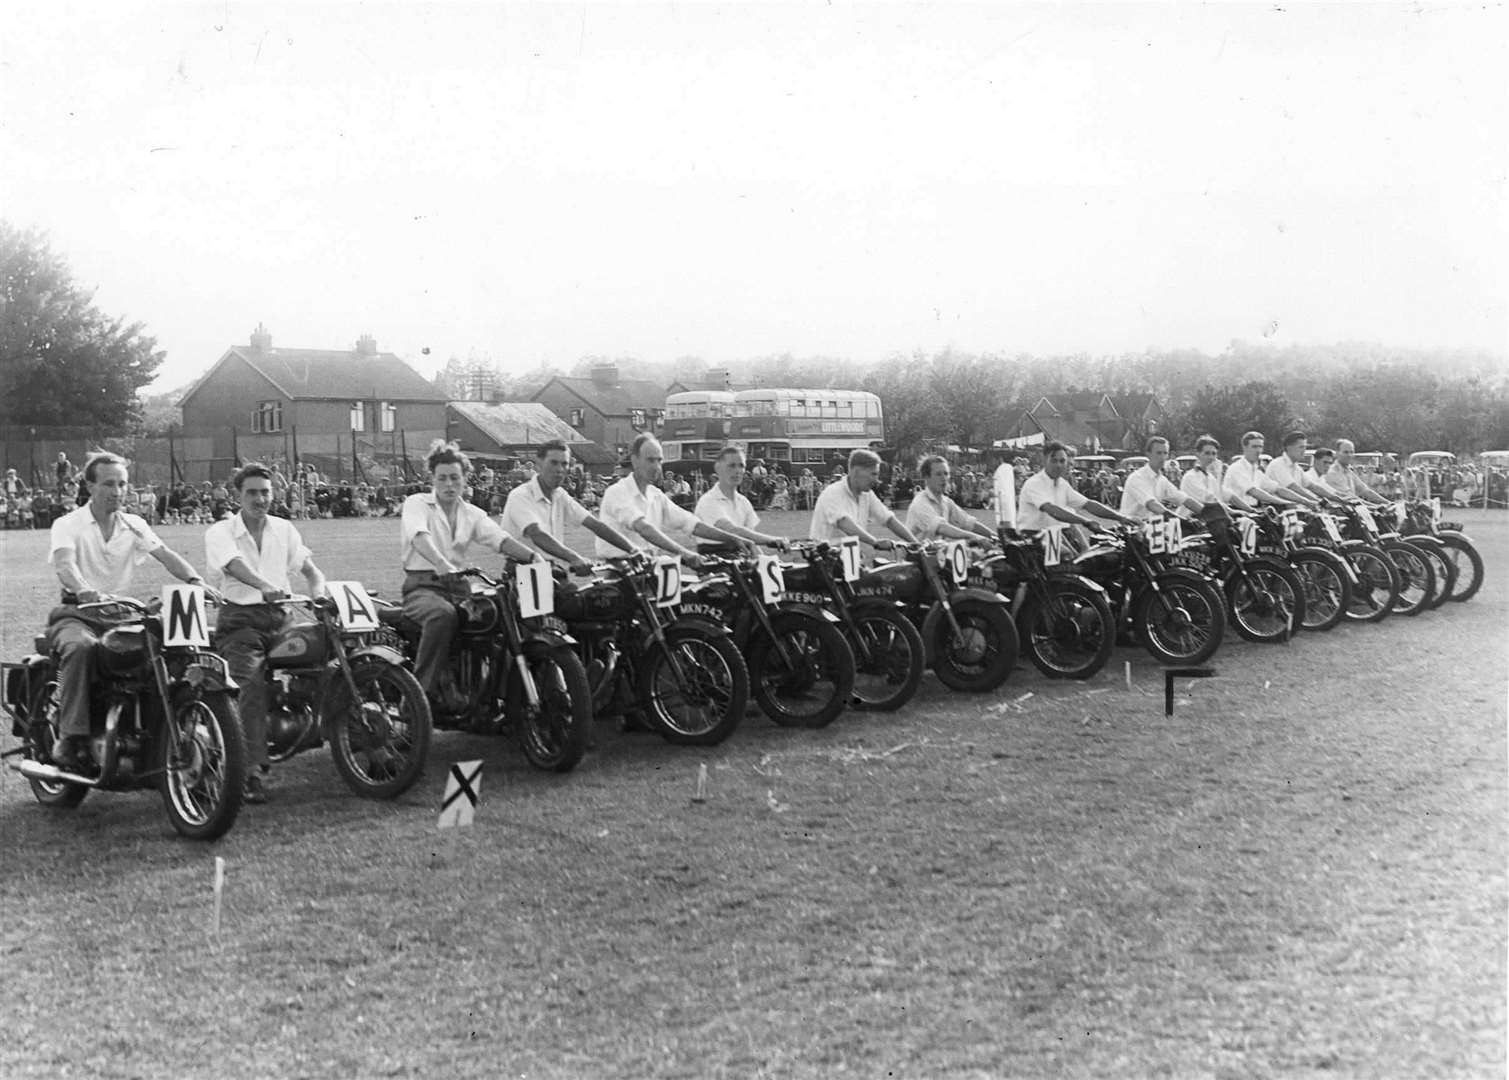 Maidstone Aces Motor Cycle club members gave a display at Boughton Monchelsea fete in 1950